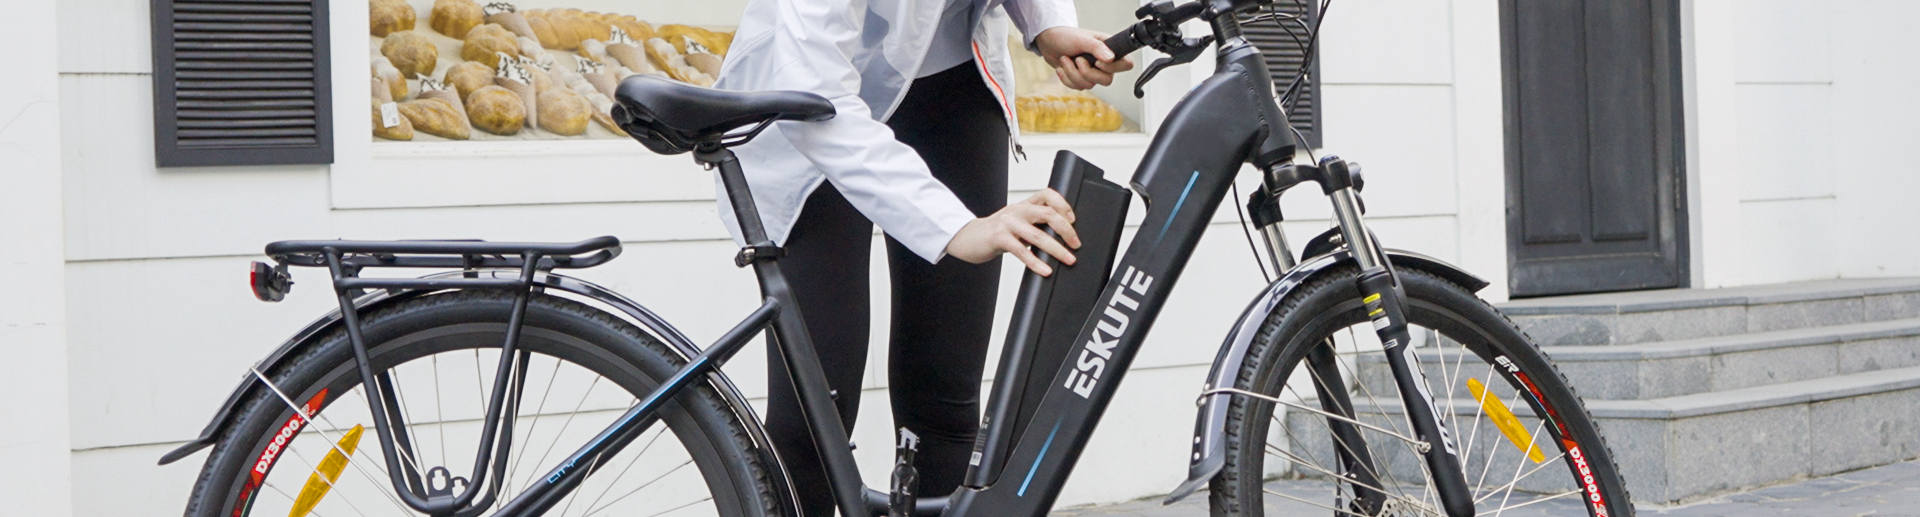 A woman is replacing an electric bike battery 